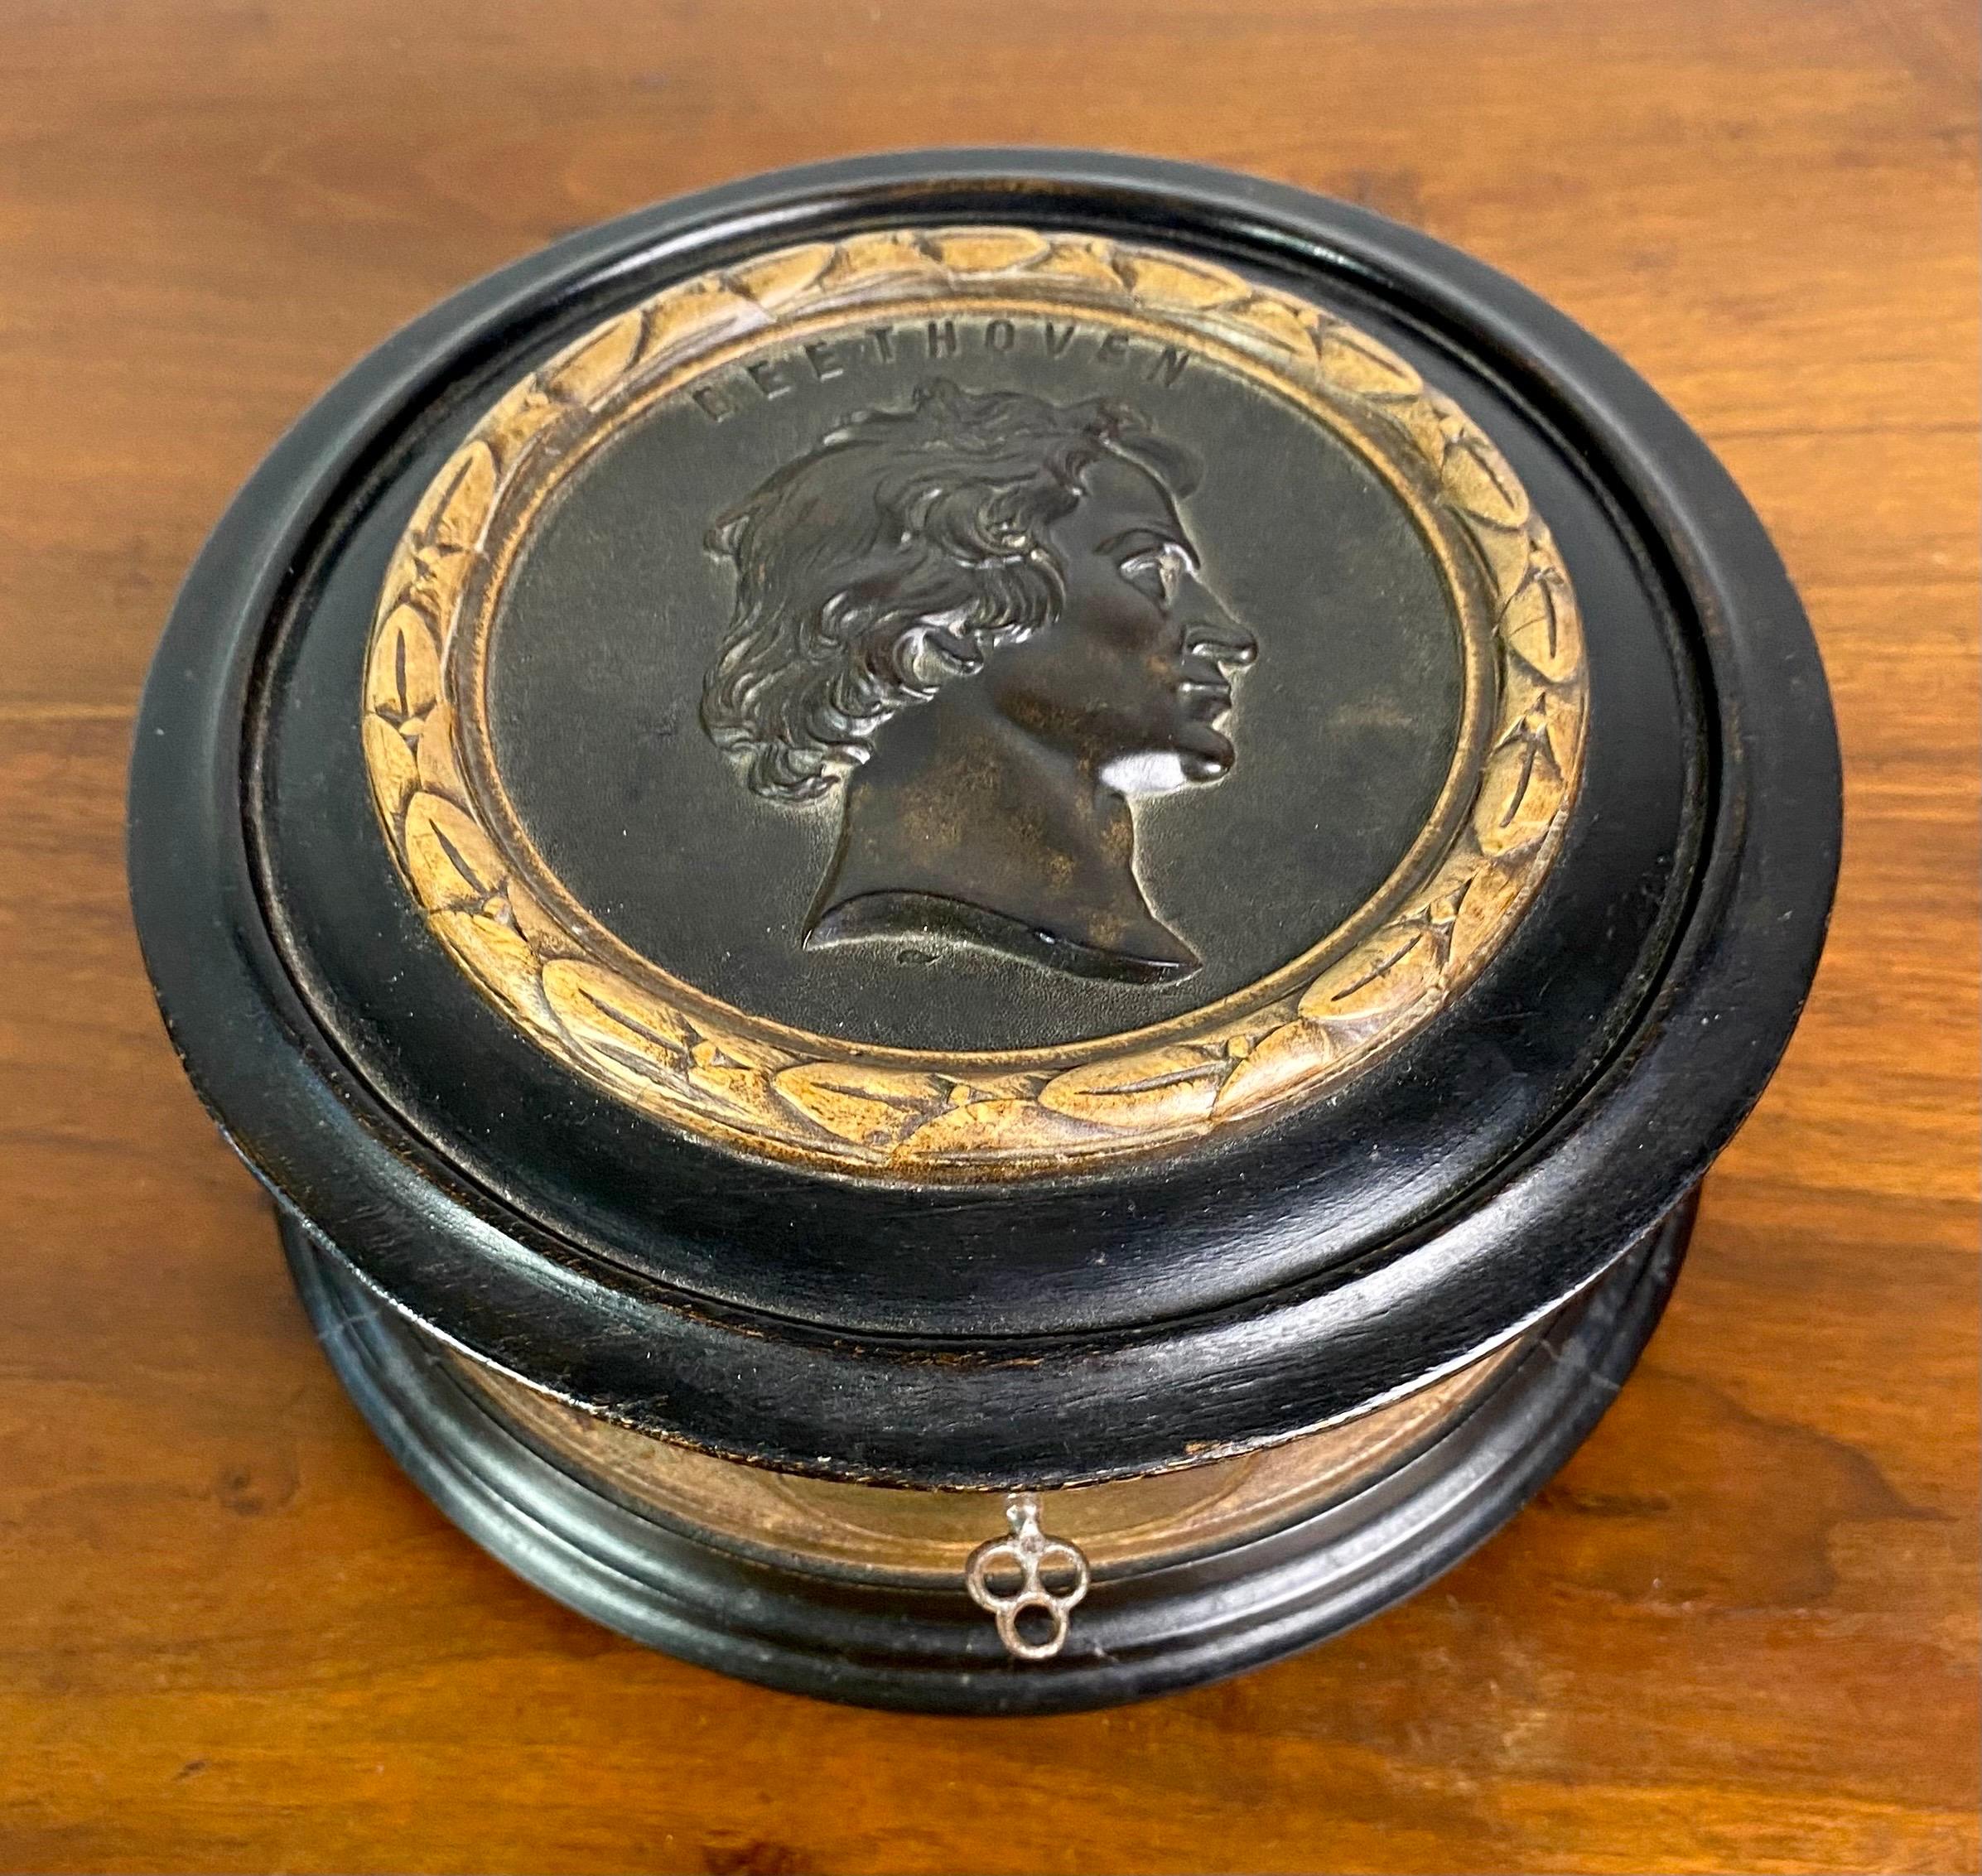 Louis XVI style carved wooden jewelry treasure box. The wood is carved in relief with foliage decoration all around, and the profile of Beethoven is very nicely and finely carved on the lid,
This profile in a circle and the play of colors and